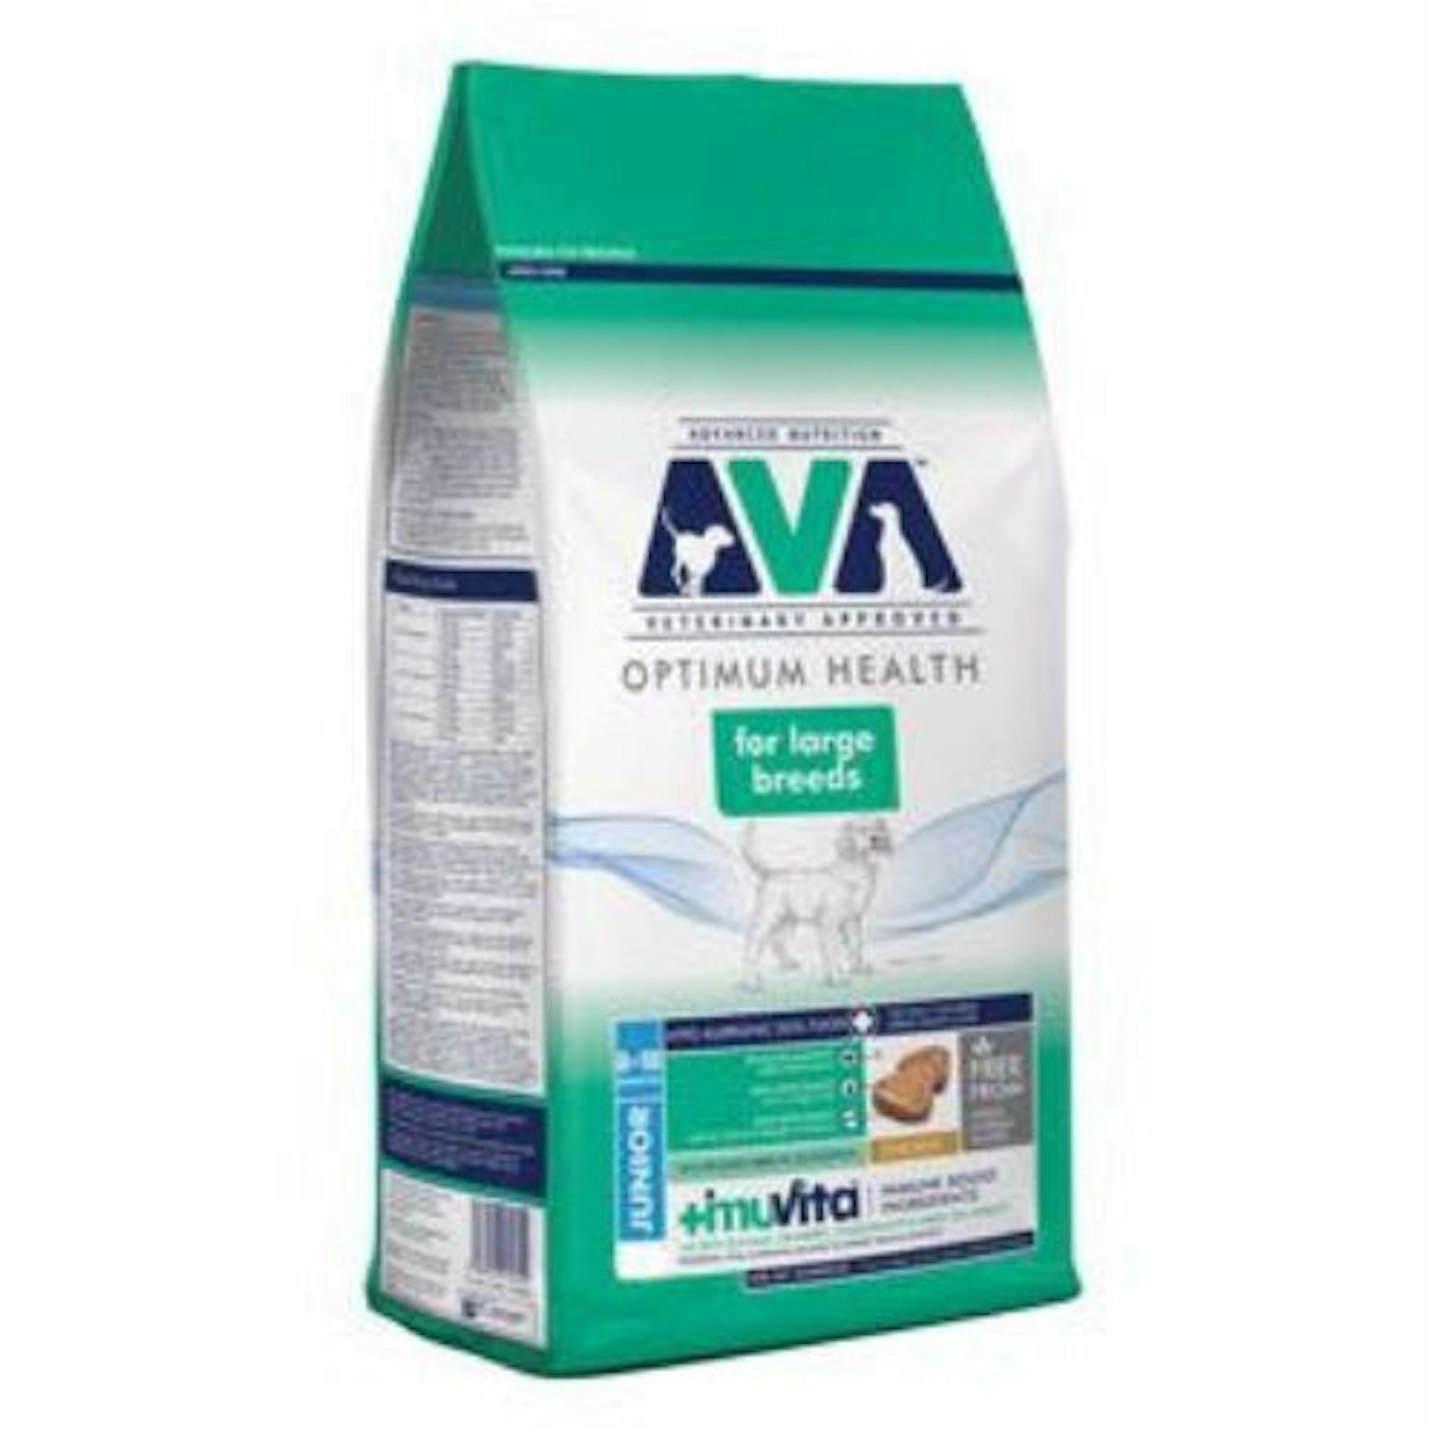 AVA Veterinary Approved Optimum Health Large Breed Dry Puppy Food Chicken